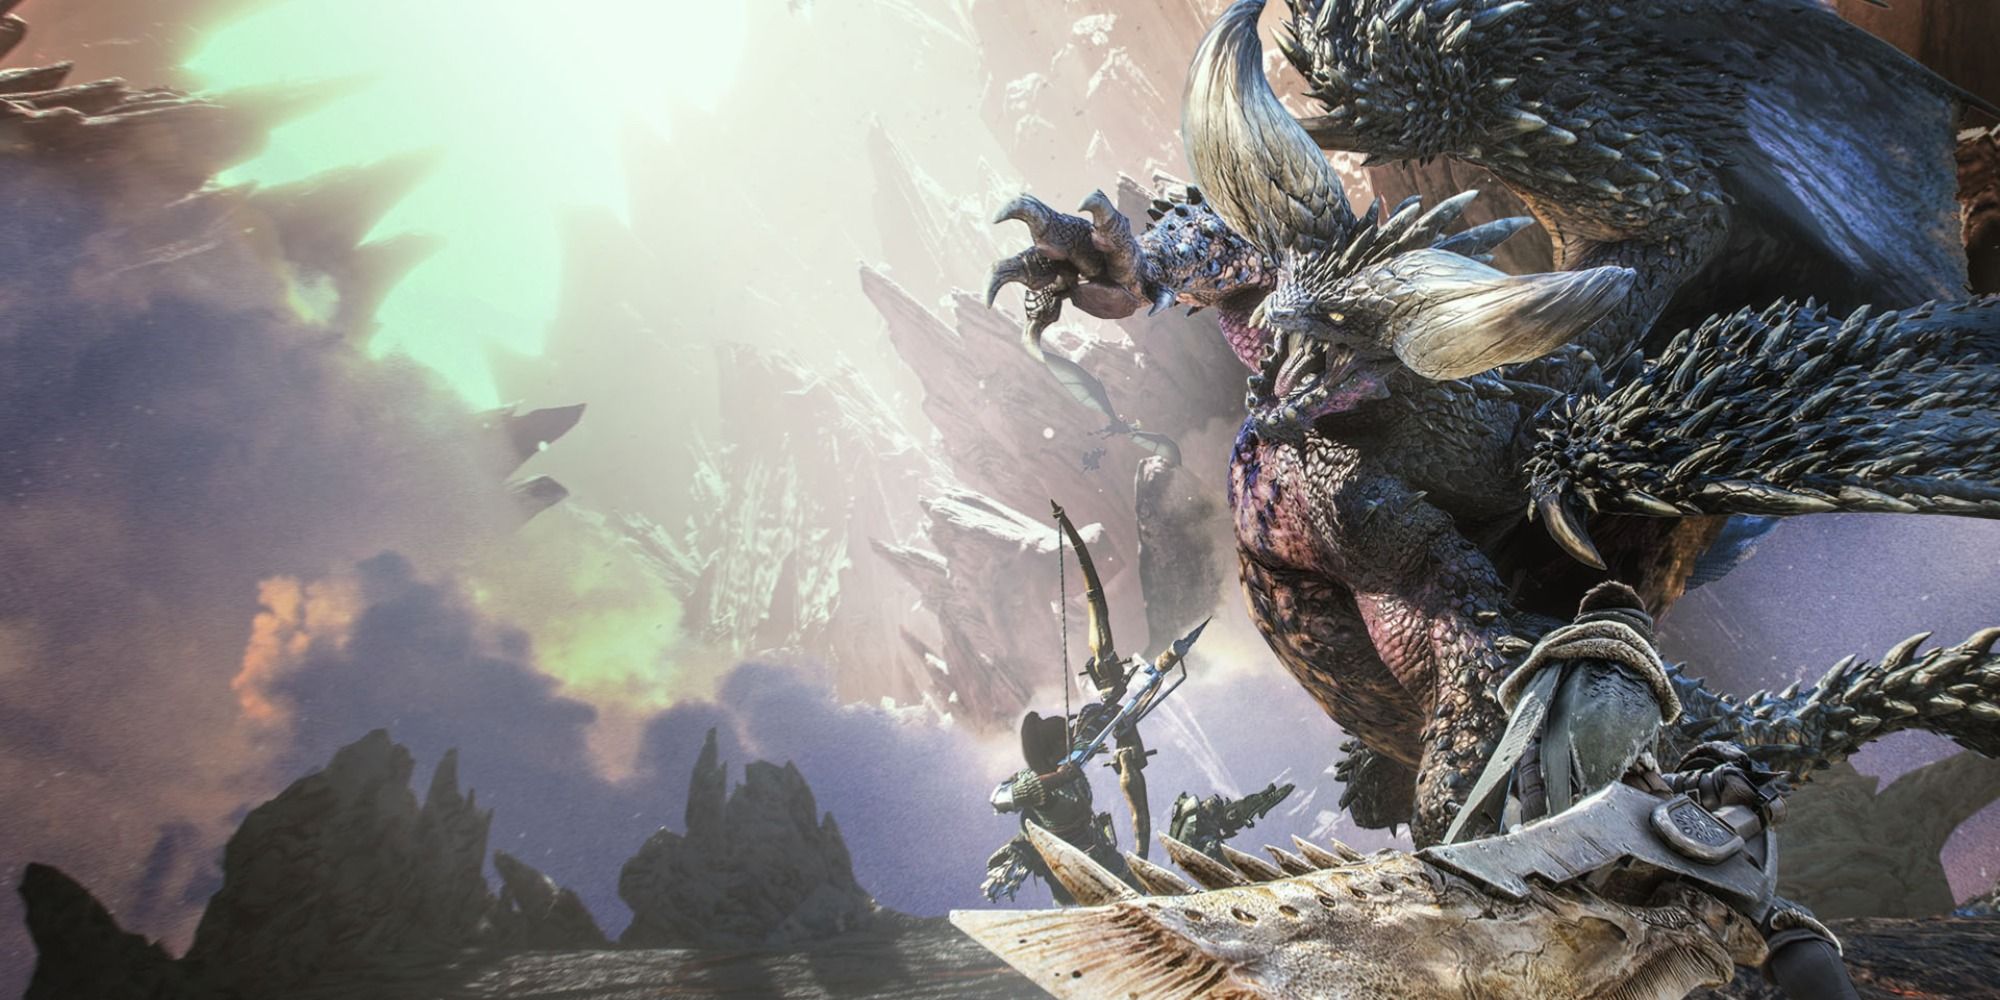 Xbox Game Pass Co-op Monster Hunter World Fighting a Monster